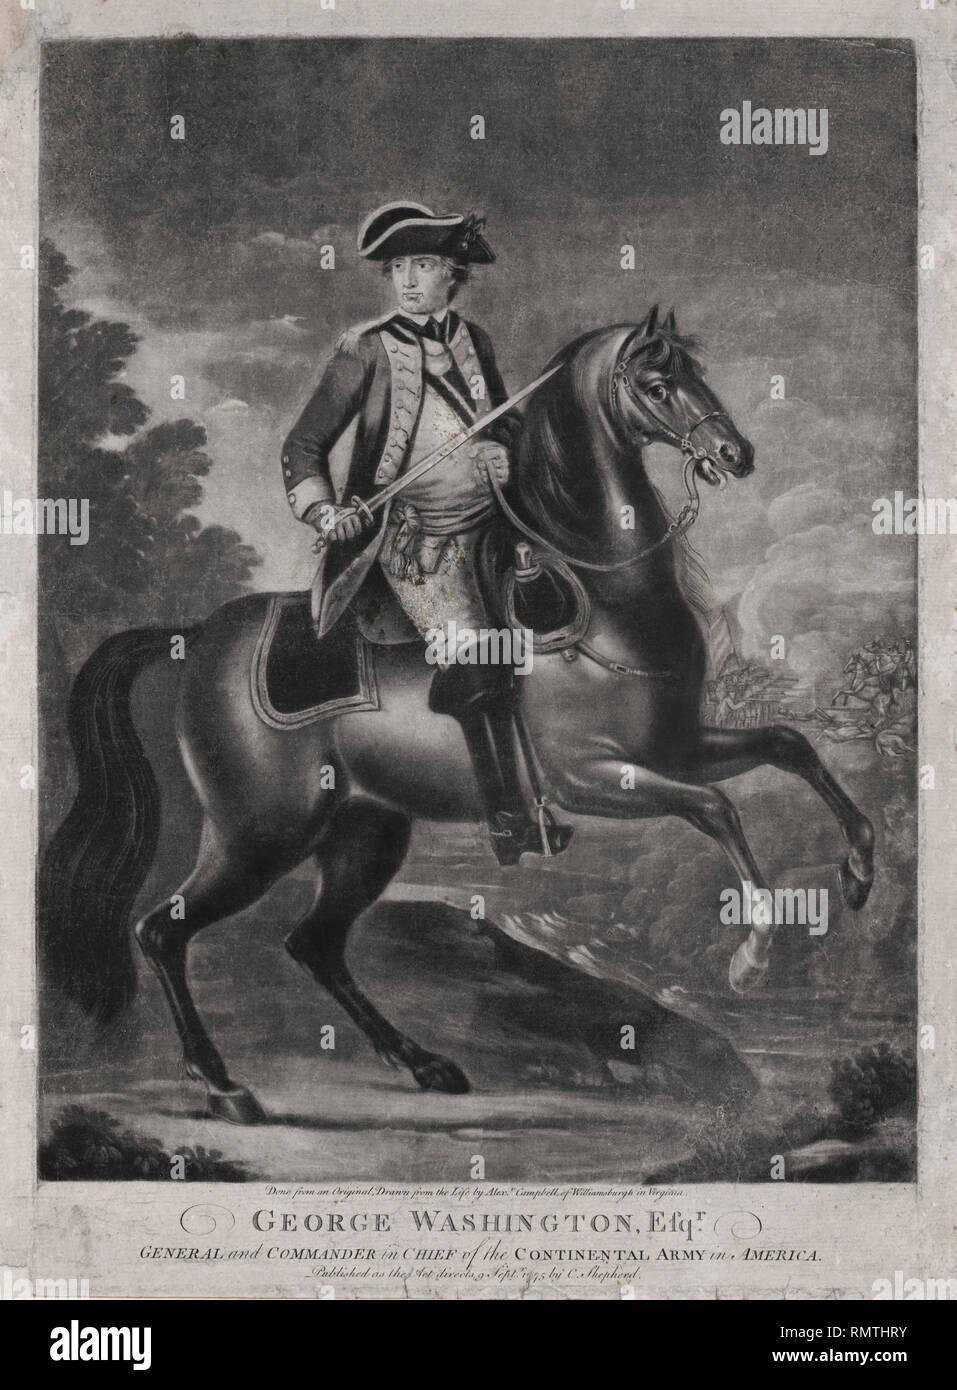 George Washington, Esqr., General and Commander in Chief of the Continental Army in America, done from an Original, Drawn from the Life by Alexander Campbell of Williamsburgh in Virginia, Published by C. Shepherd, 1775 Stock Photo